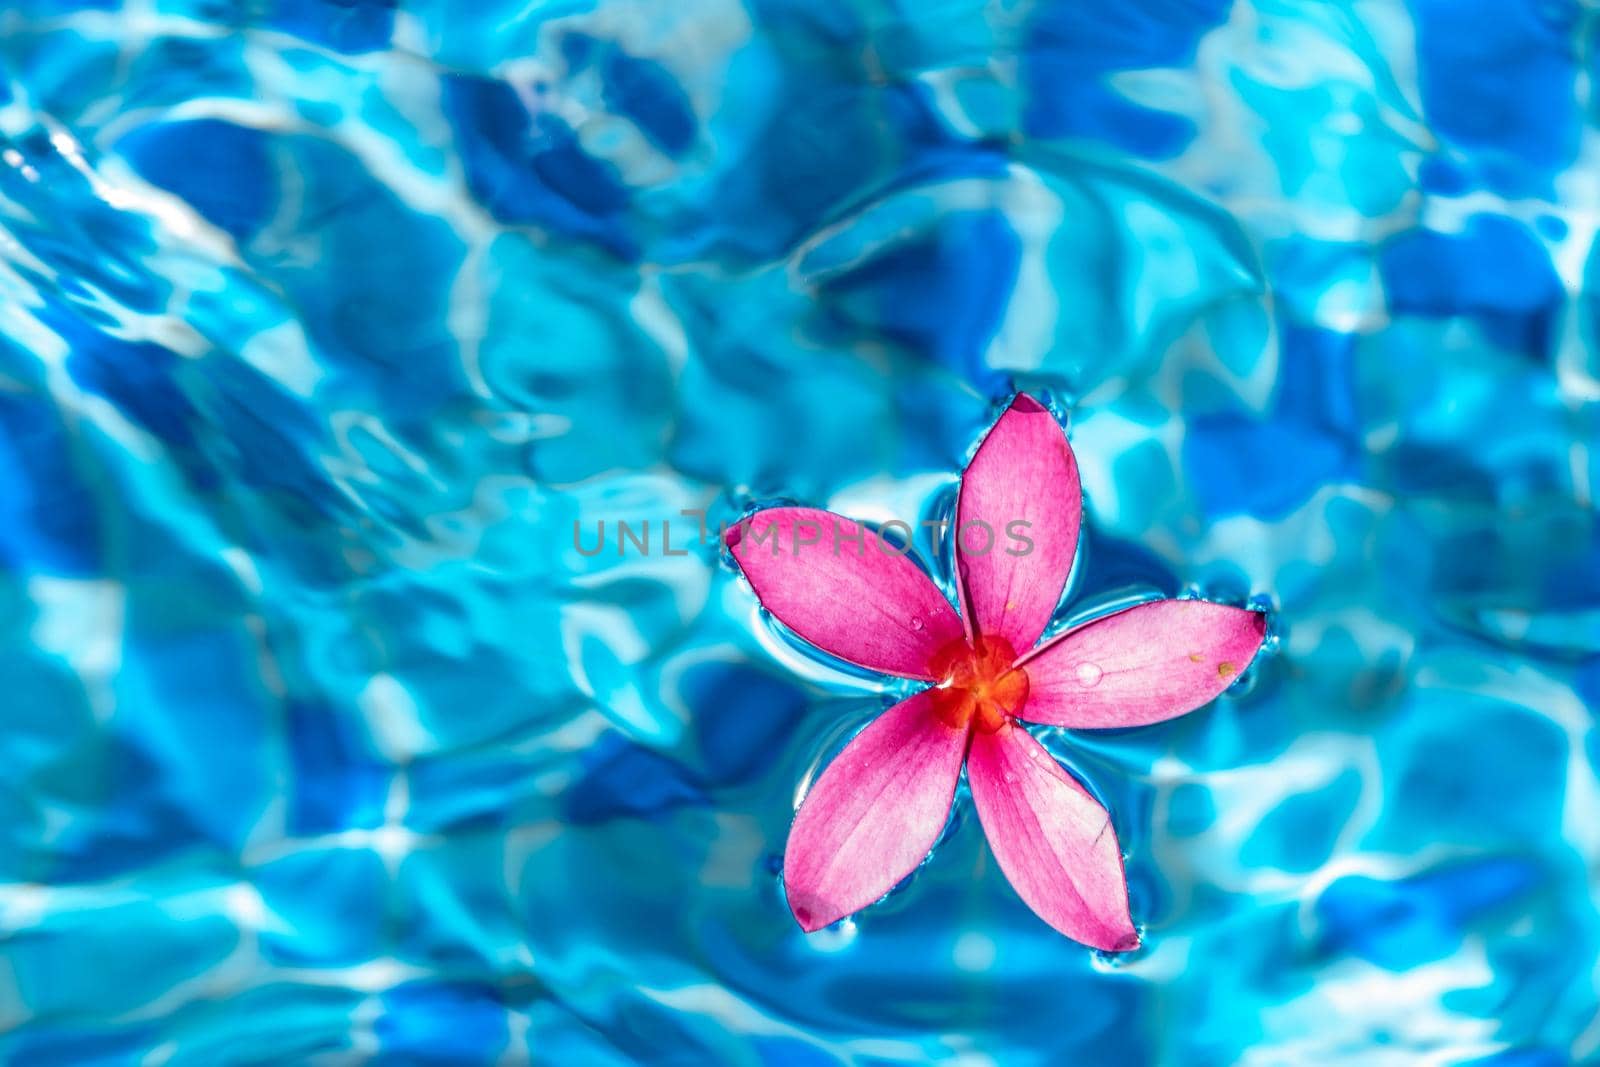 Pink flower closeup shot while floating on a blue pond water